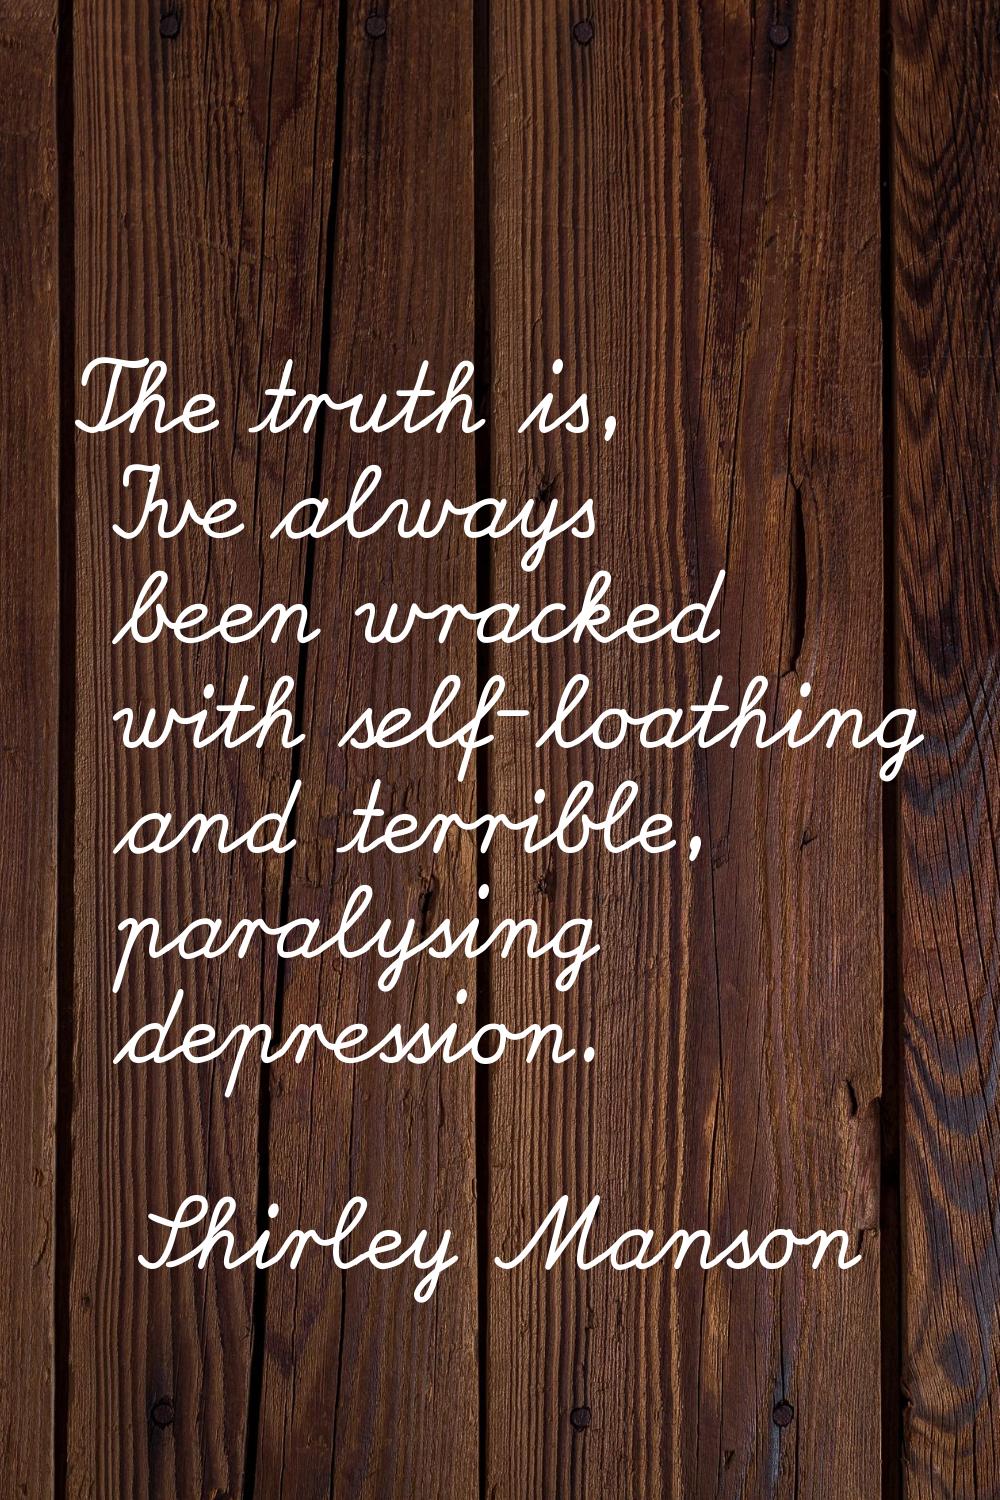 The truth is, I've always been wracked with self-loathing and terrible, paralysing depression.